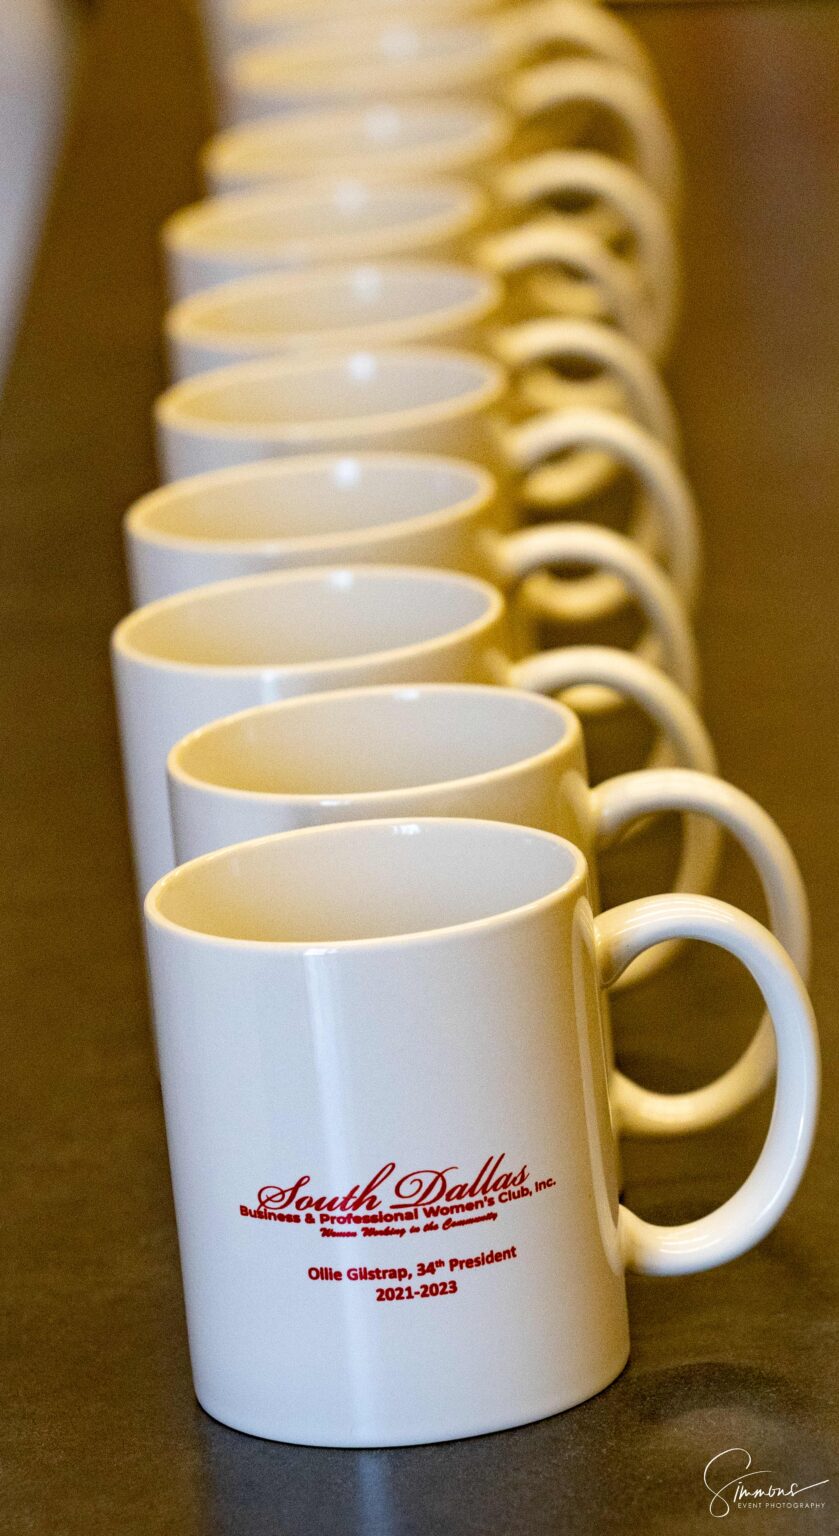 A row of coffee cups lined up on top of each other.